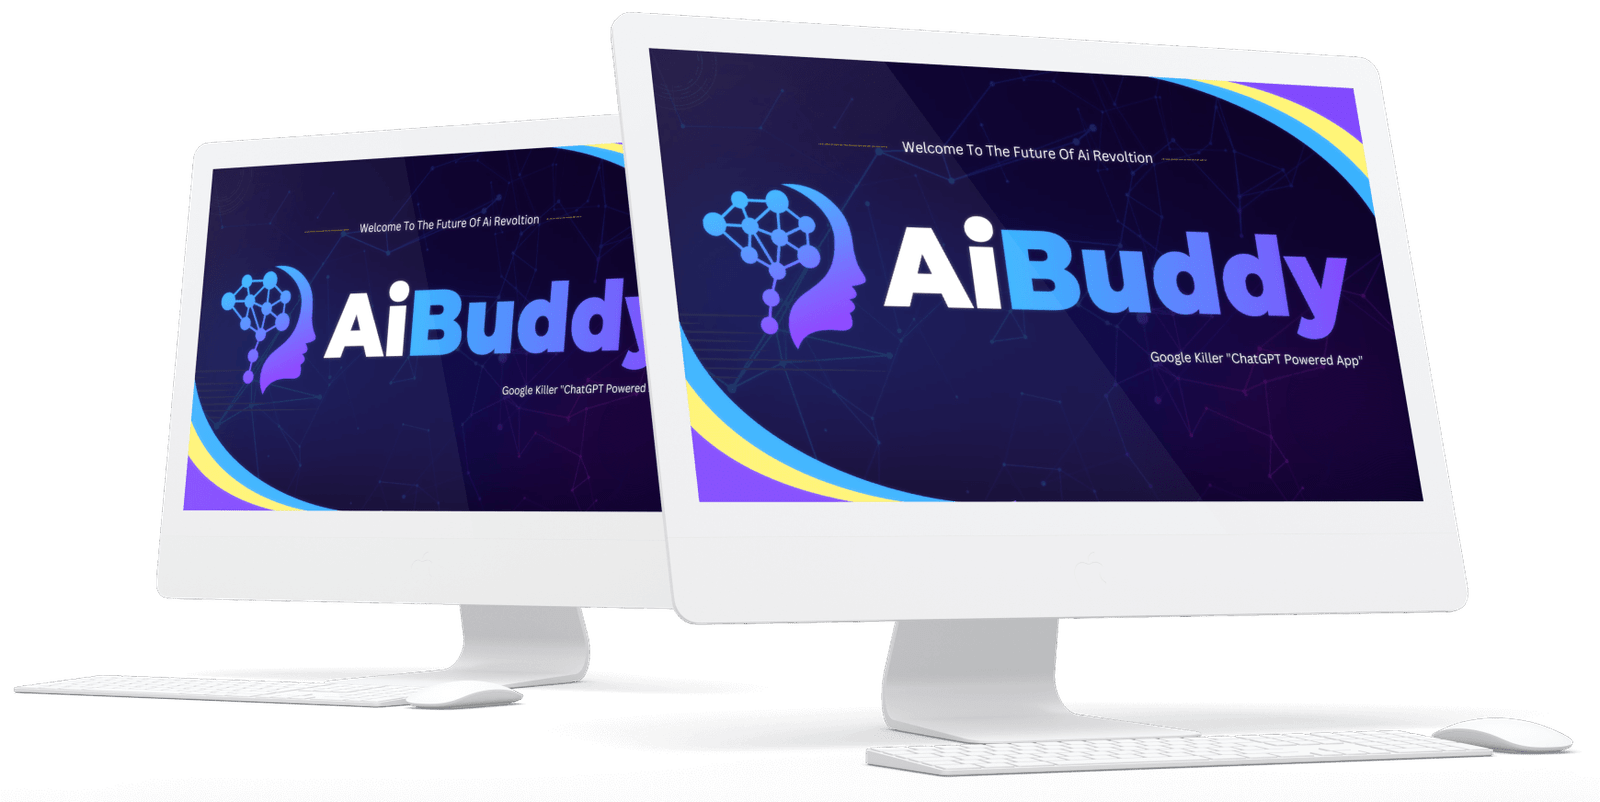 AI Buddy Review - Gain More Business Profits With The Power Of ChartGPT